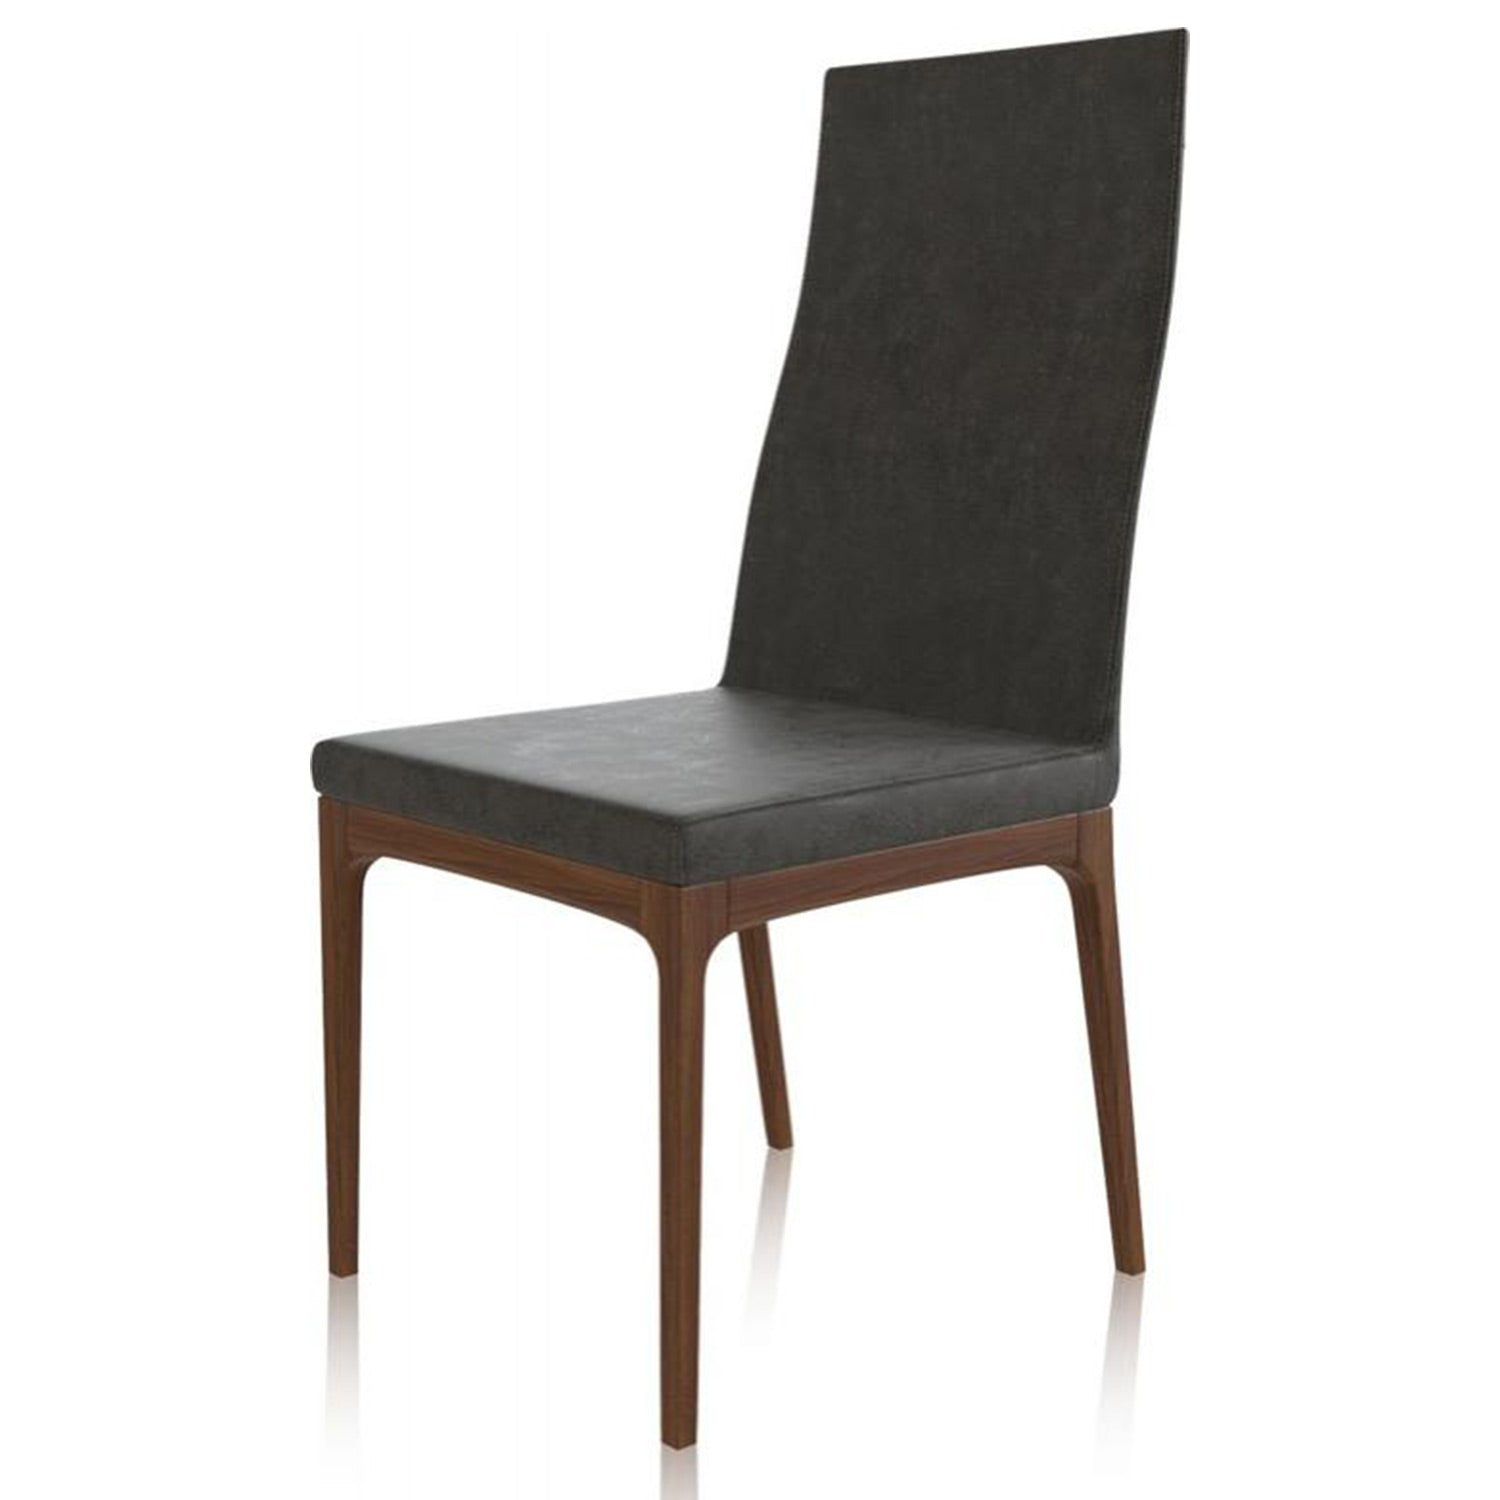 Lanzo dining chair